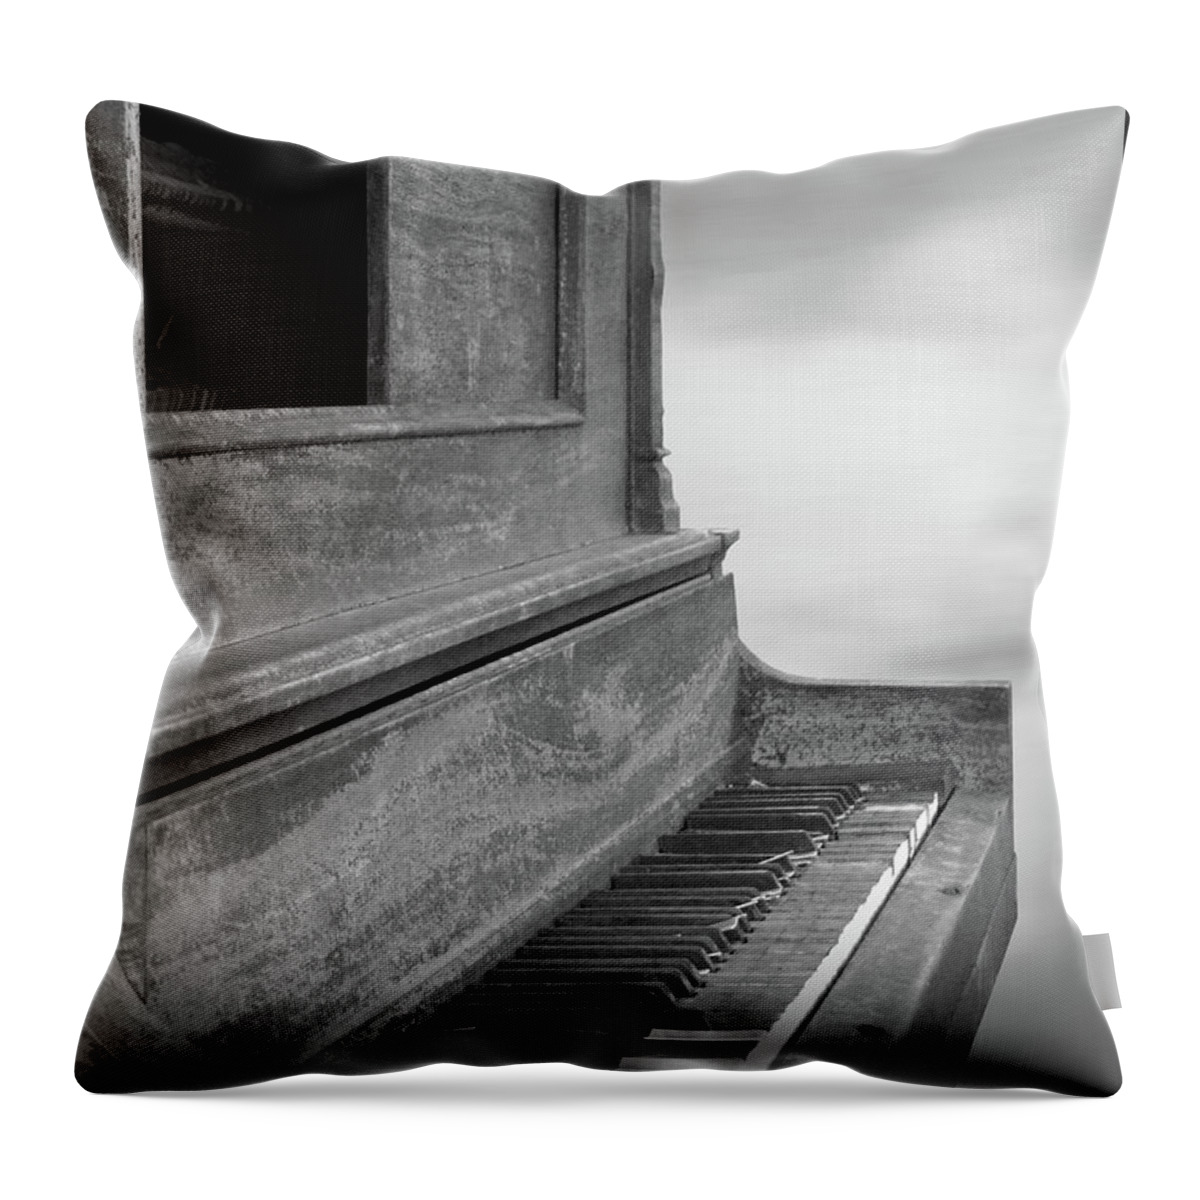 Landscape Throw Pillow featuring the photograph Weathered Piano 2 by Mike McGlothlen